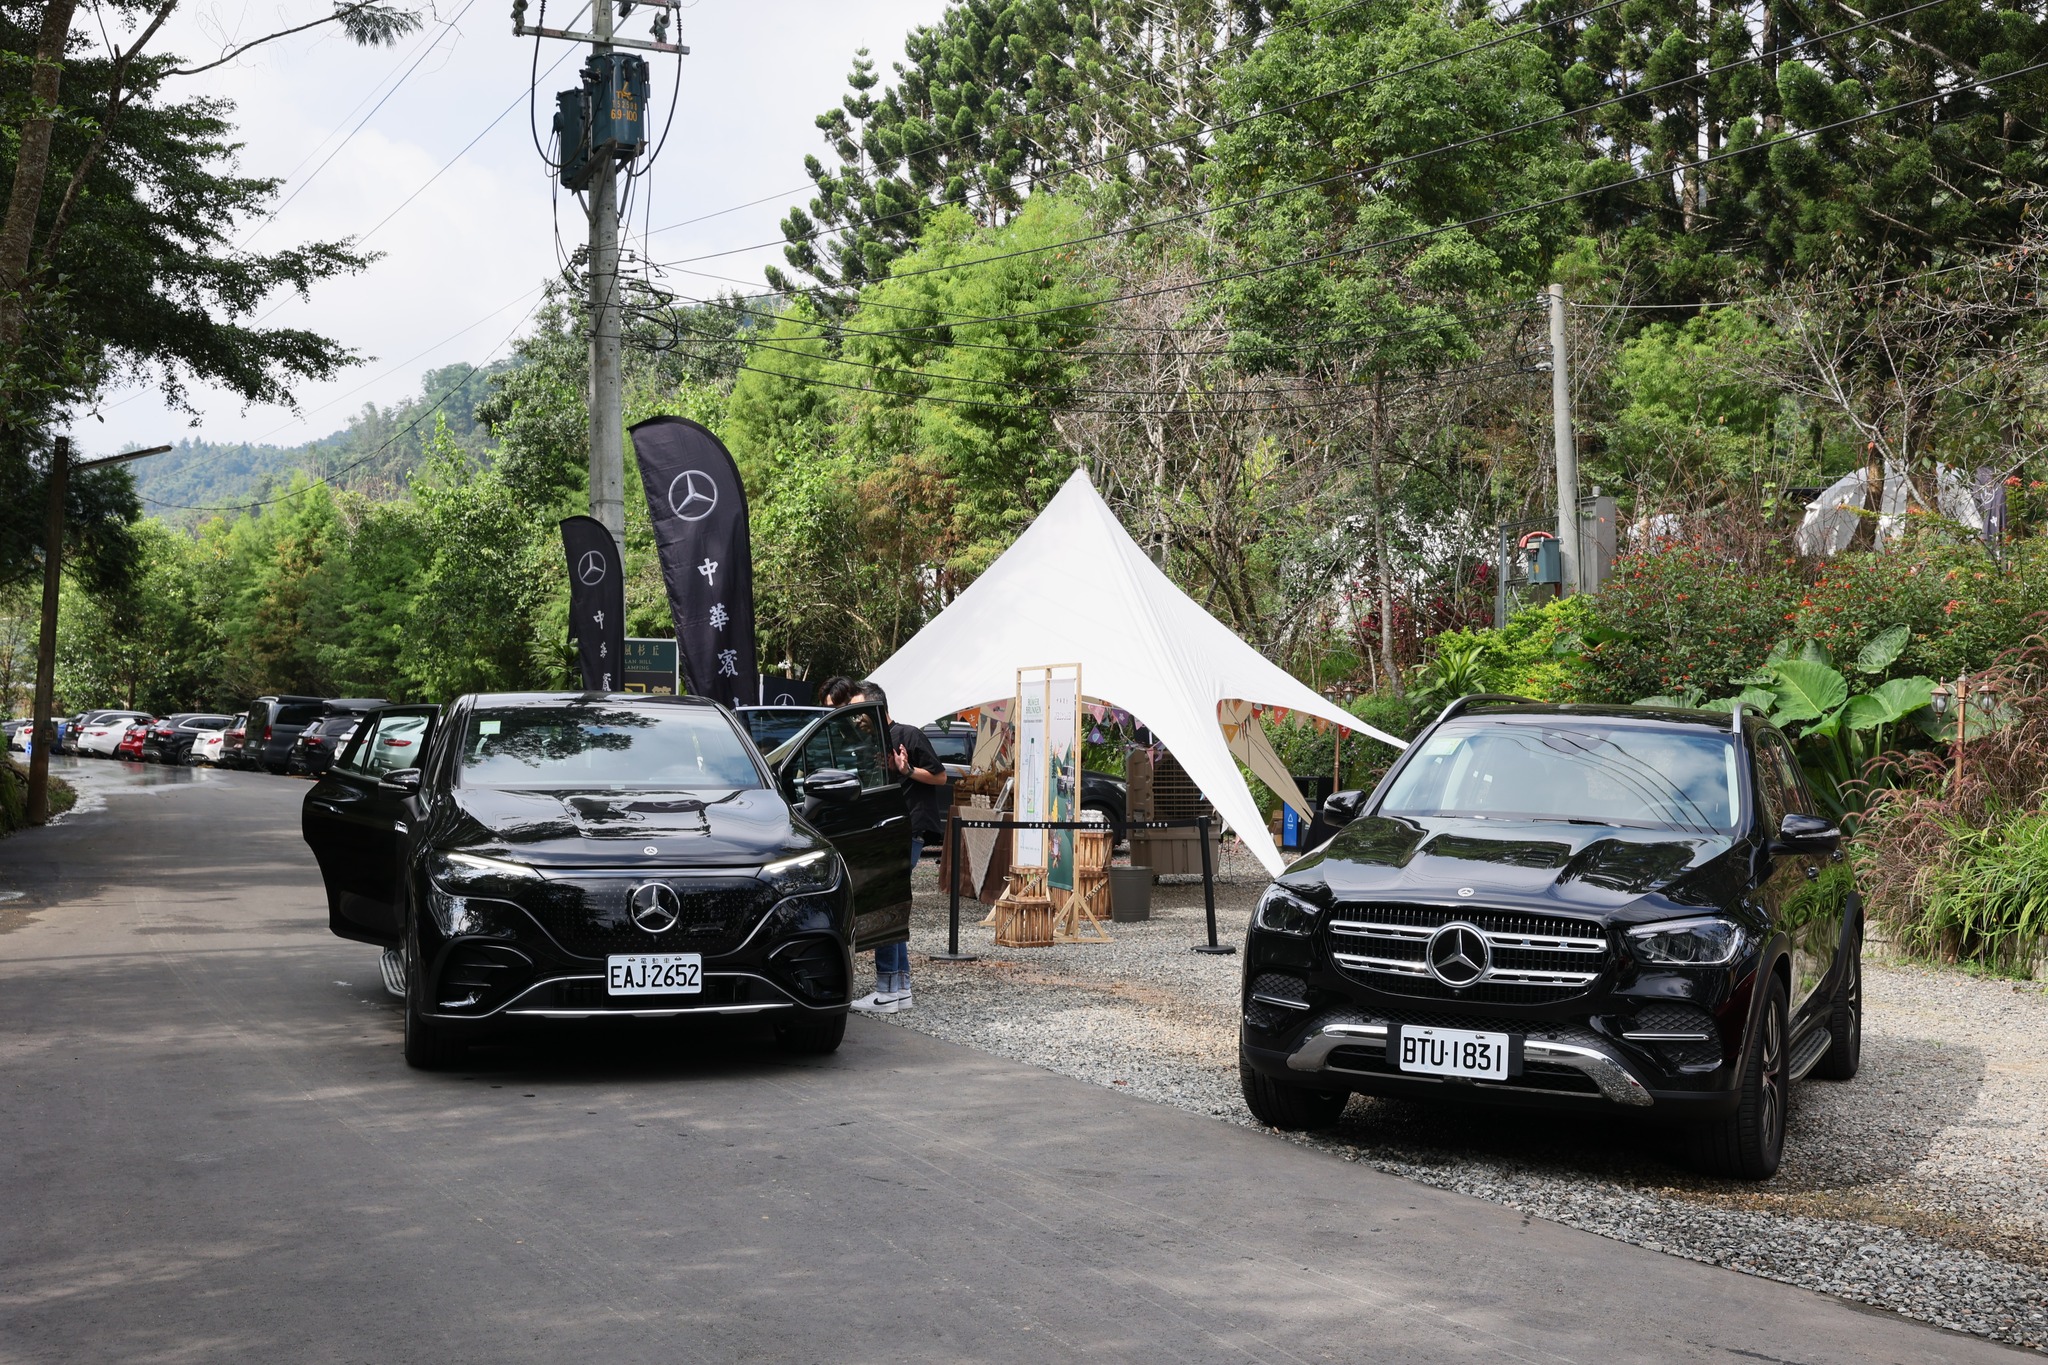 Capital Motors launches inaugural 7-day Mercedes-Benz Glamping Escapade for its customers.